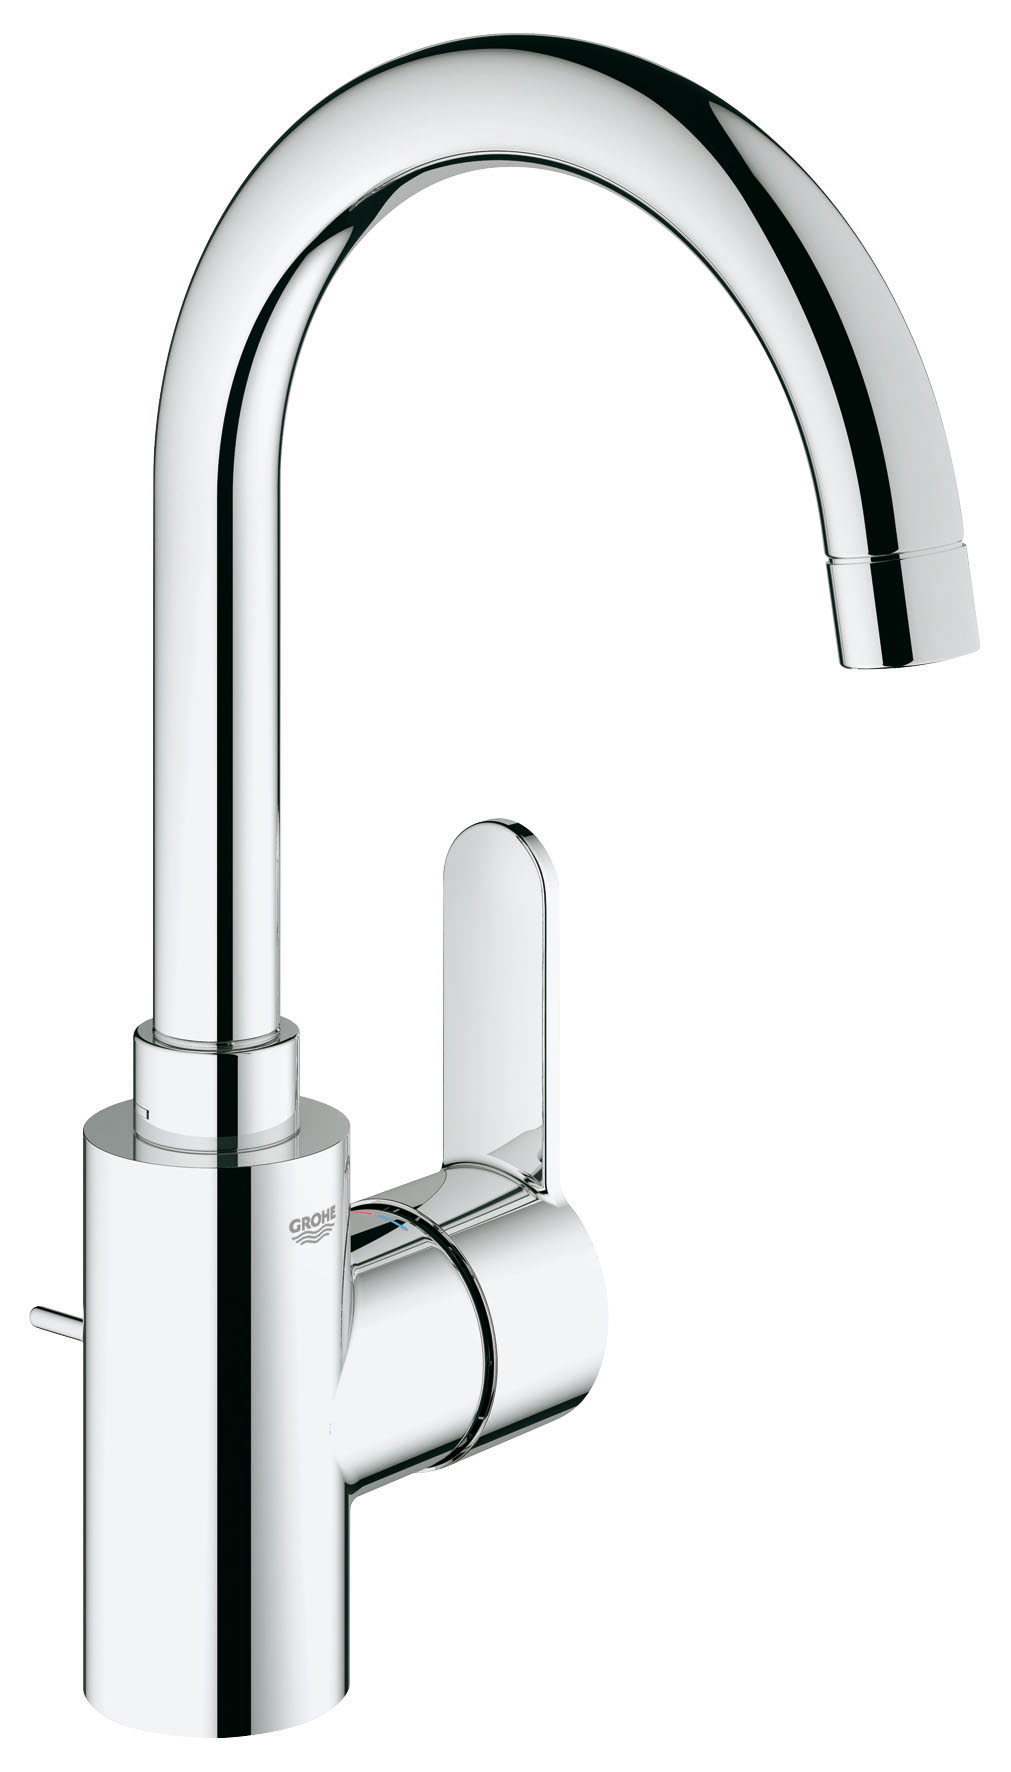    GROHE Eurostyle Cosmopolitan    (23043002) - Grohe23043002       :      ,    GROHE Eurostyle Cosmopolitan     .      ,       ,        .          ,        .        100        .      GROHE.        GROHE StarLight   GROHE SilkMove   35     ,           1 1/4? GROHE QuickFix...